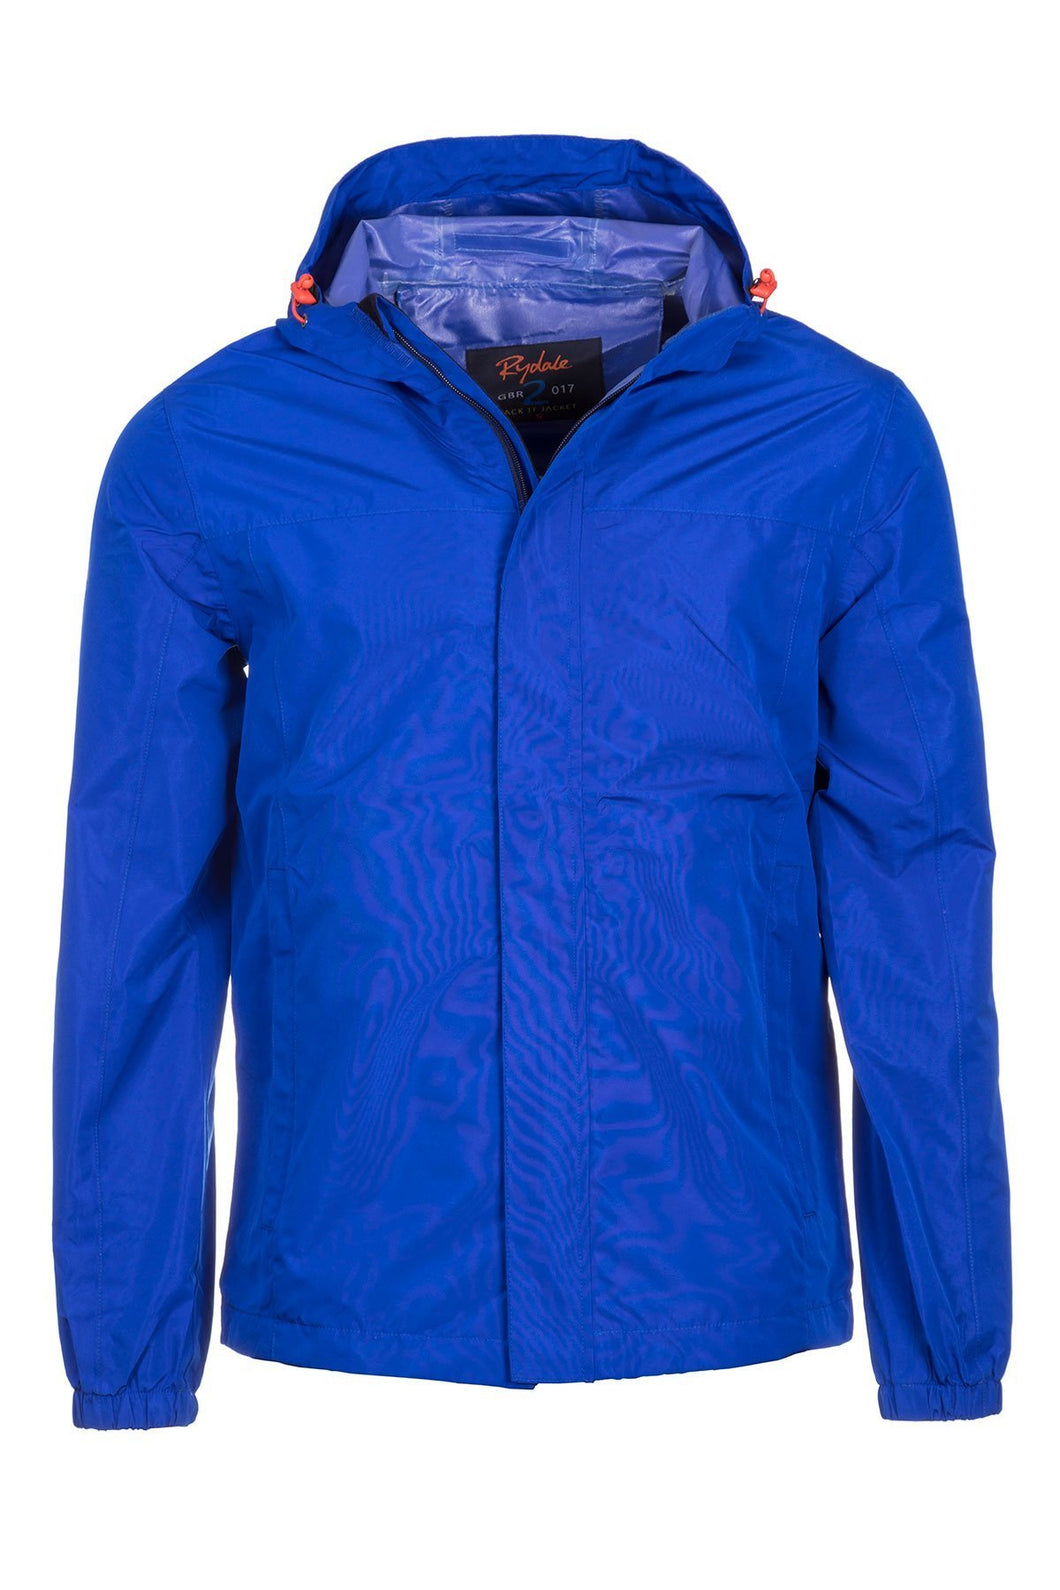 Royal Blue - Mens Jacket In A Packet